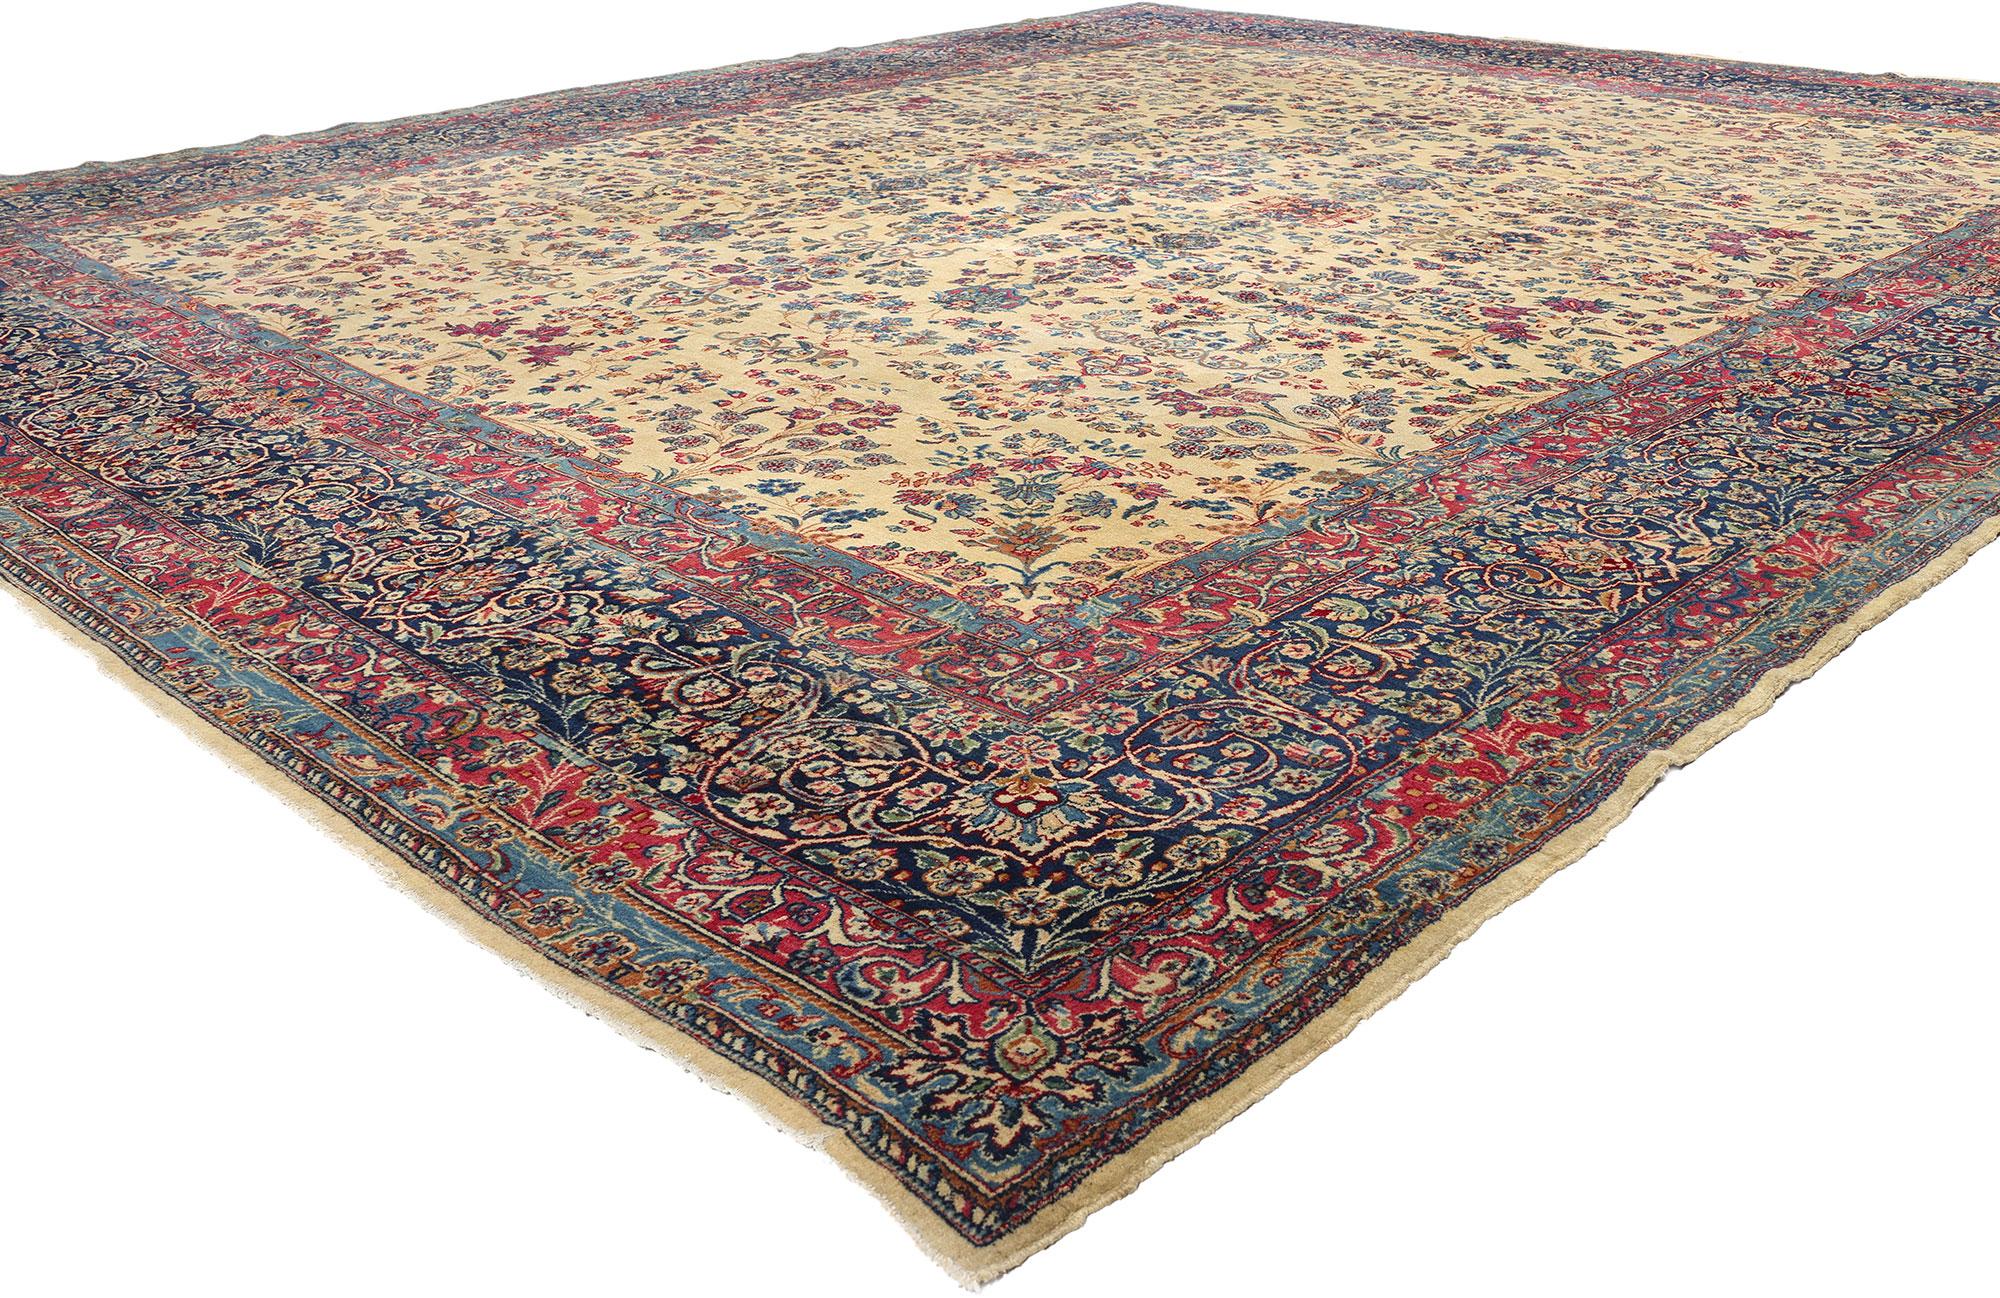 77377 Antique Persian Kerman Rug, 12'10 x 15'02. Kerman rugs with allover flowers, known as vase carpets, are characteristic of the 16th and 17th centuries. They feature an allover pattern of stylized flowers, oversized palmettes, and vases placed